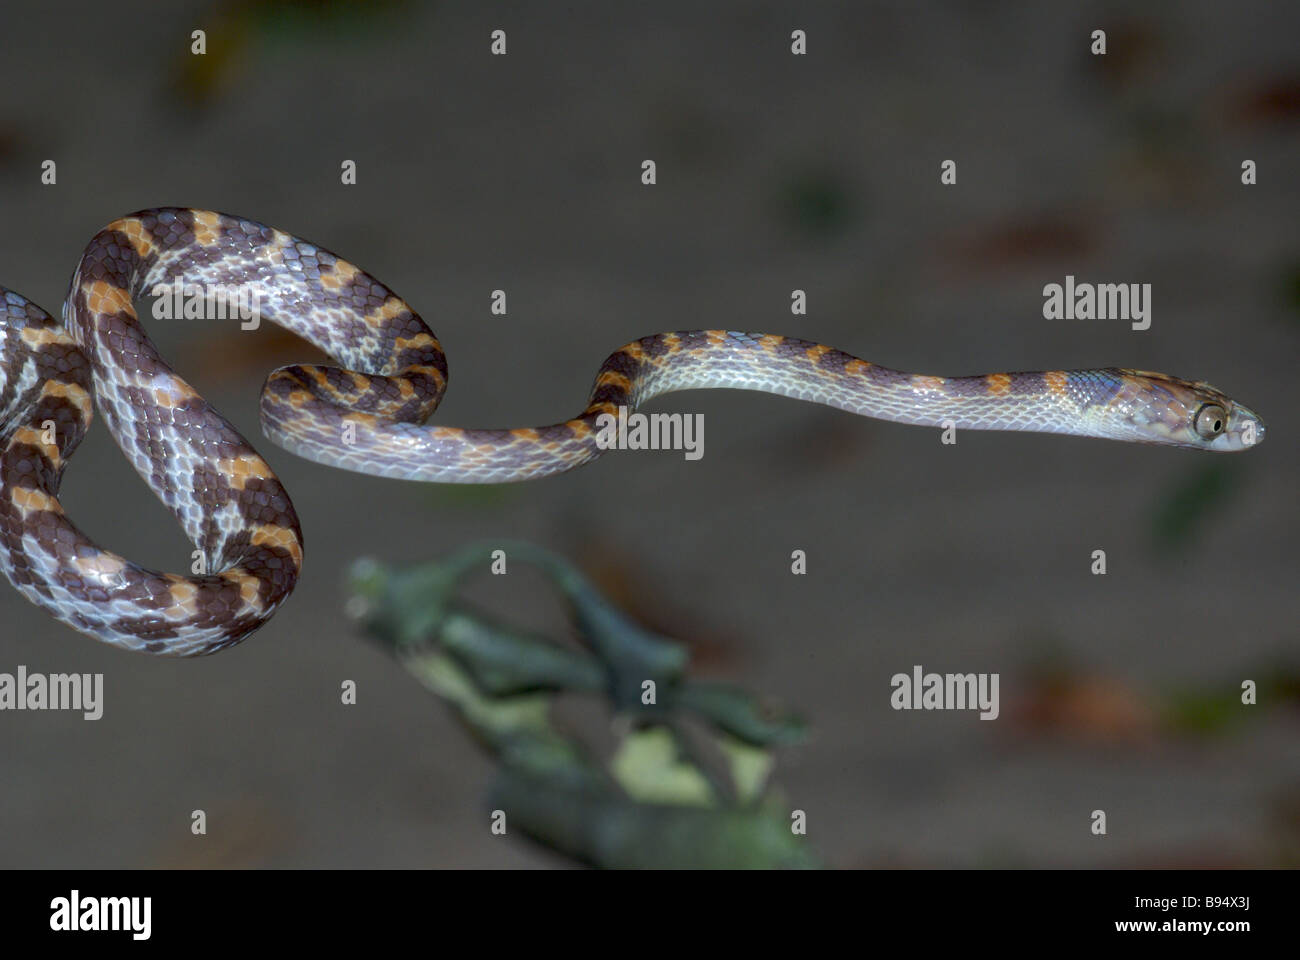 Nocturnal arboreal snake (Stenophis pseudogranuliceps) in Anjajavy, Madagascar. Stock Photo